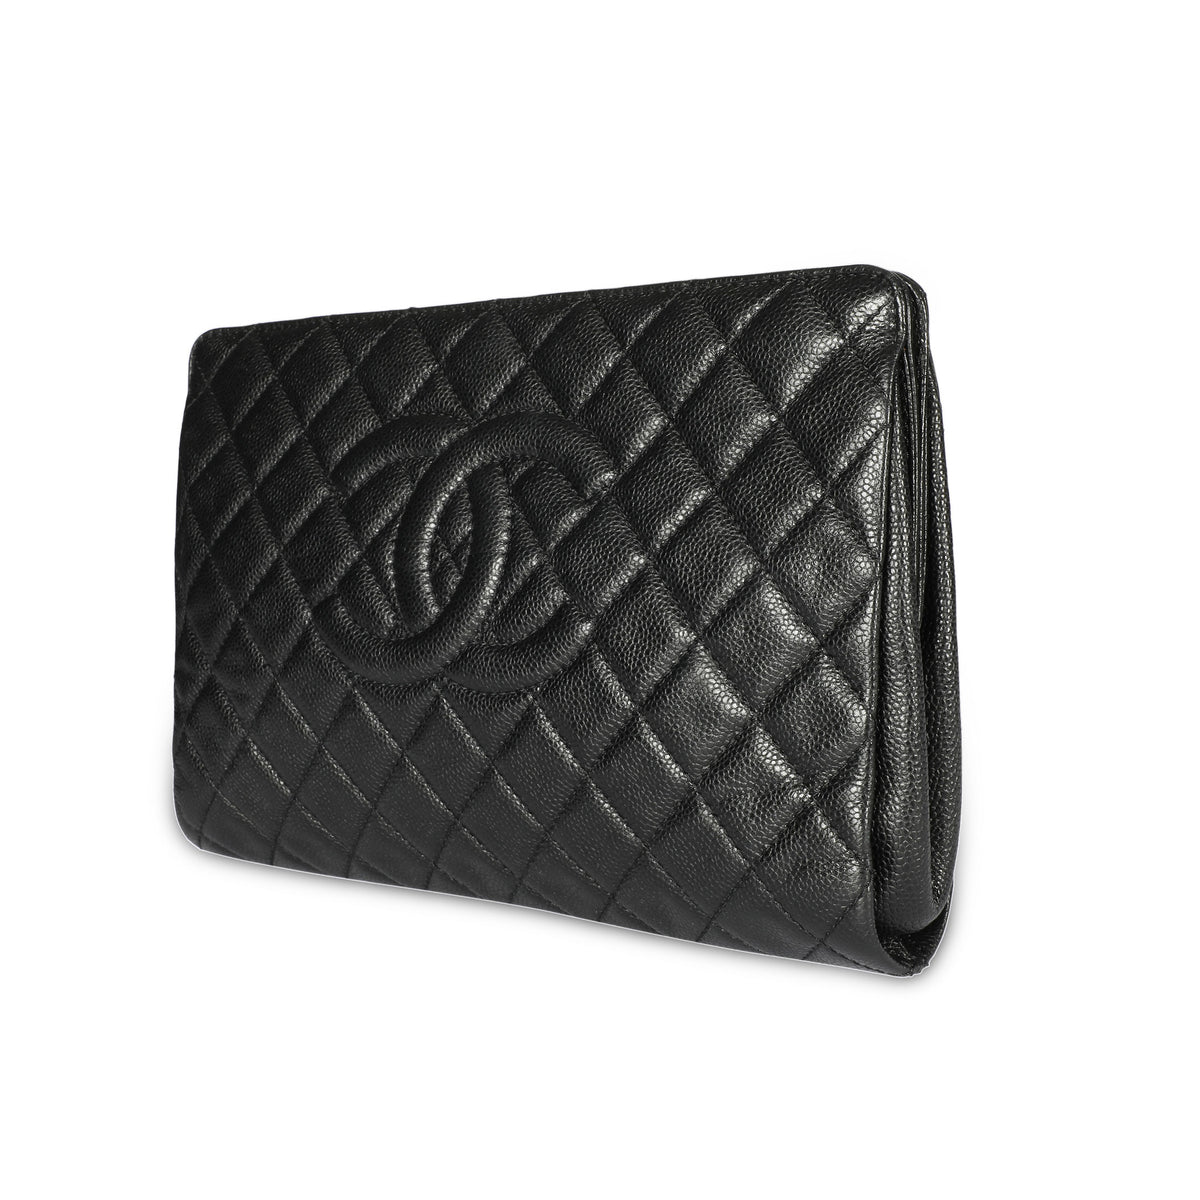 chanel by karl lagerfeld bag